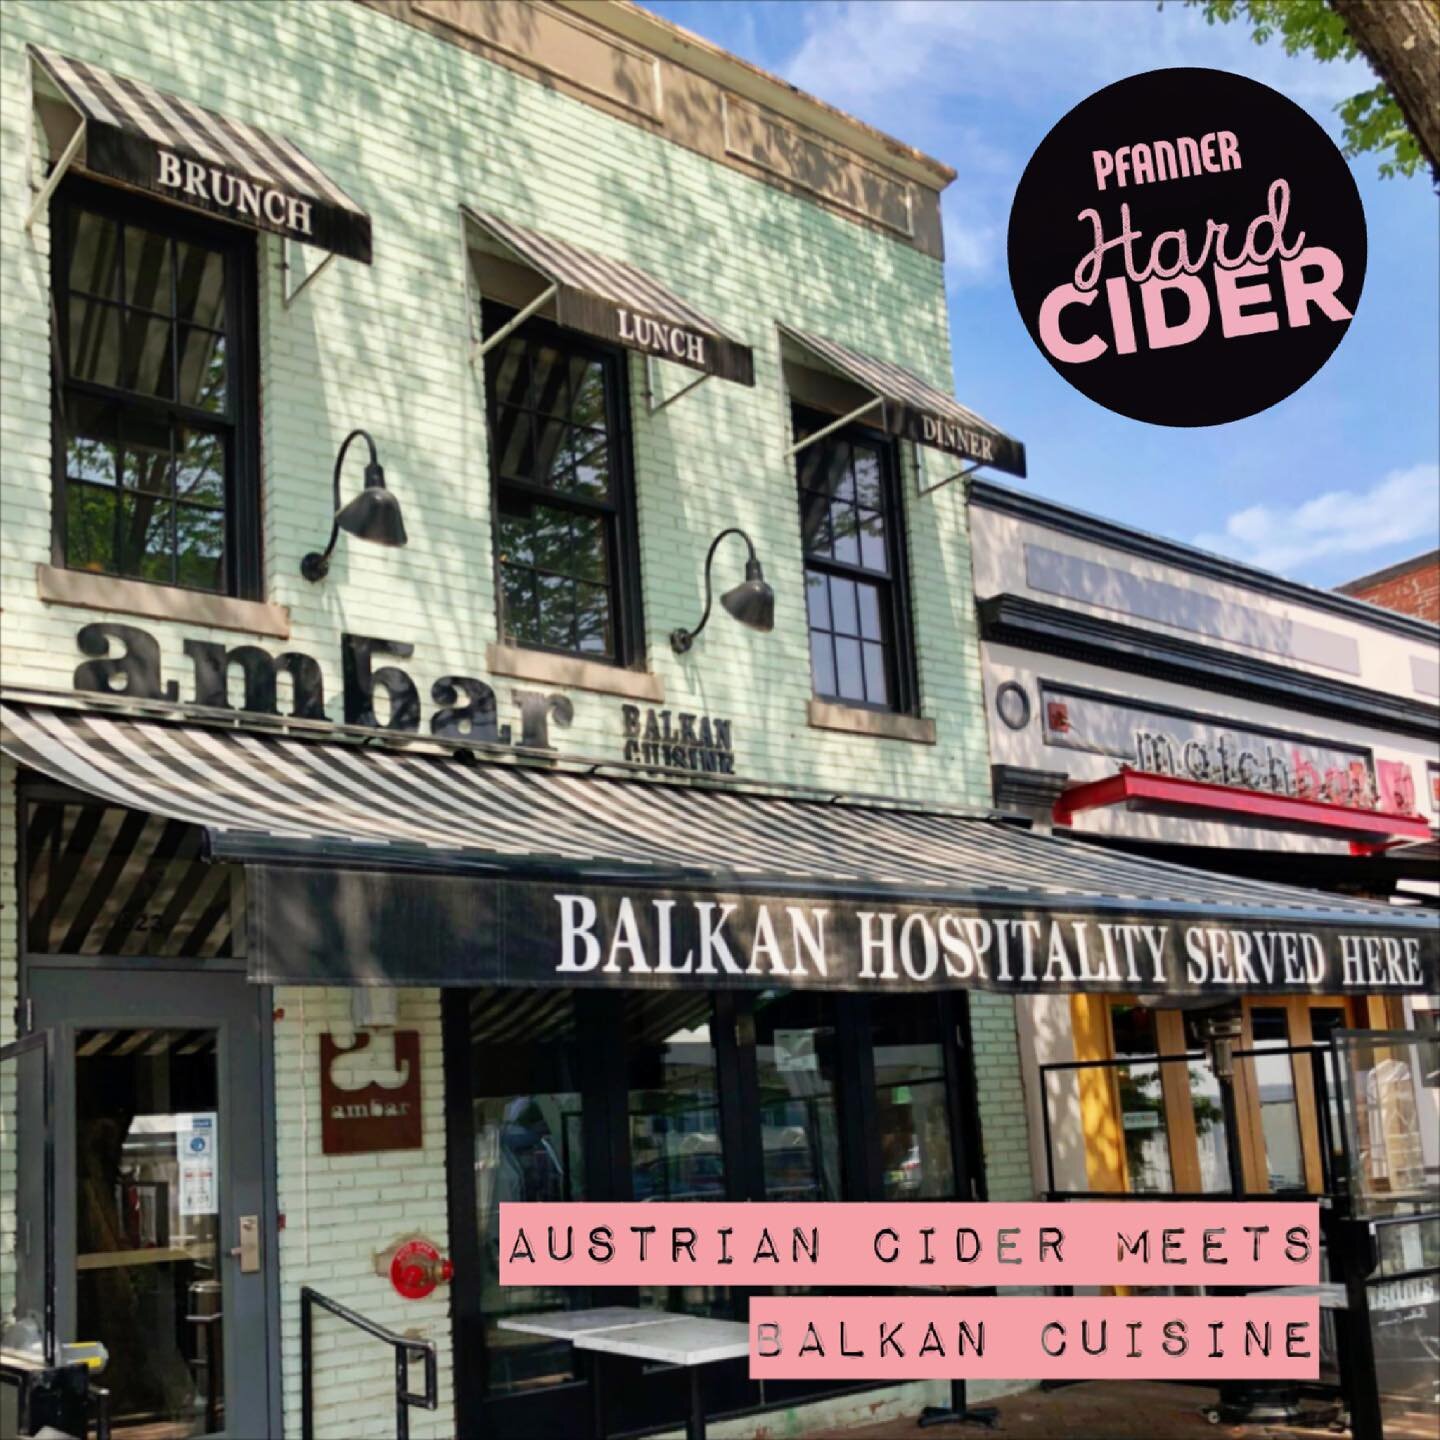 Unlimited cider and unlimited balkan food? Yes please! 

Pfanner Hard Cider is now available at @ambar_capitol_hill. What&rsquo;s your favorite balkan dish?